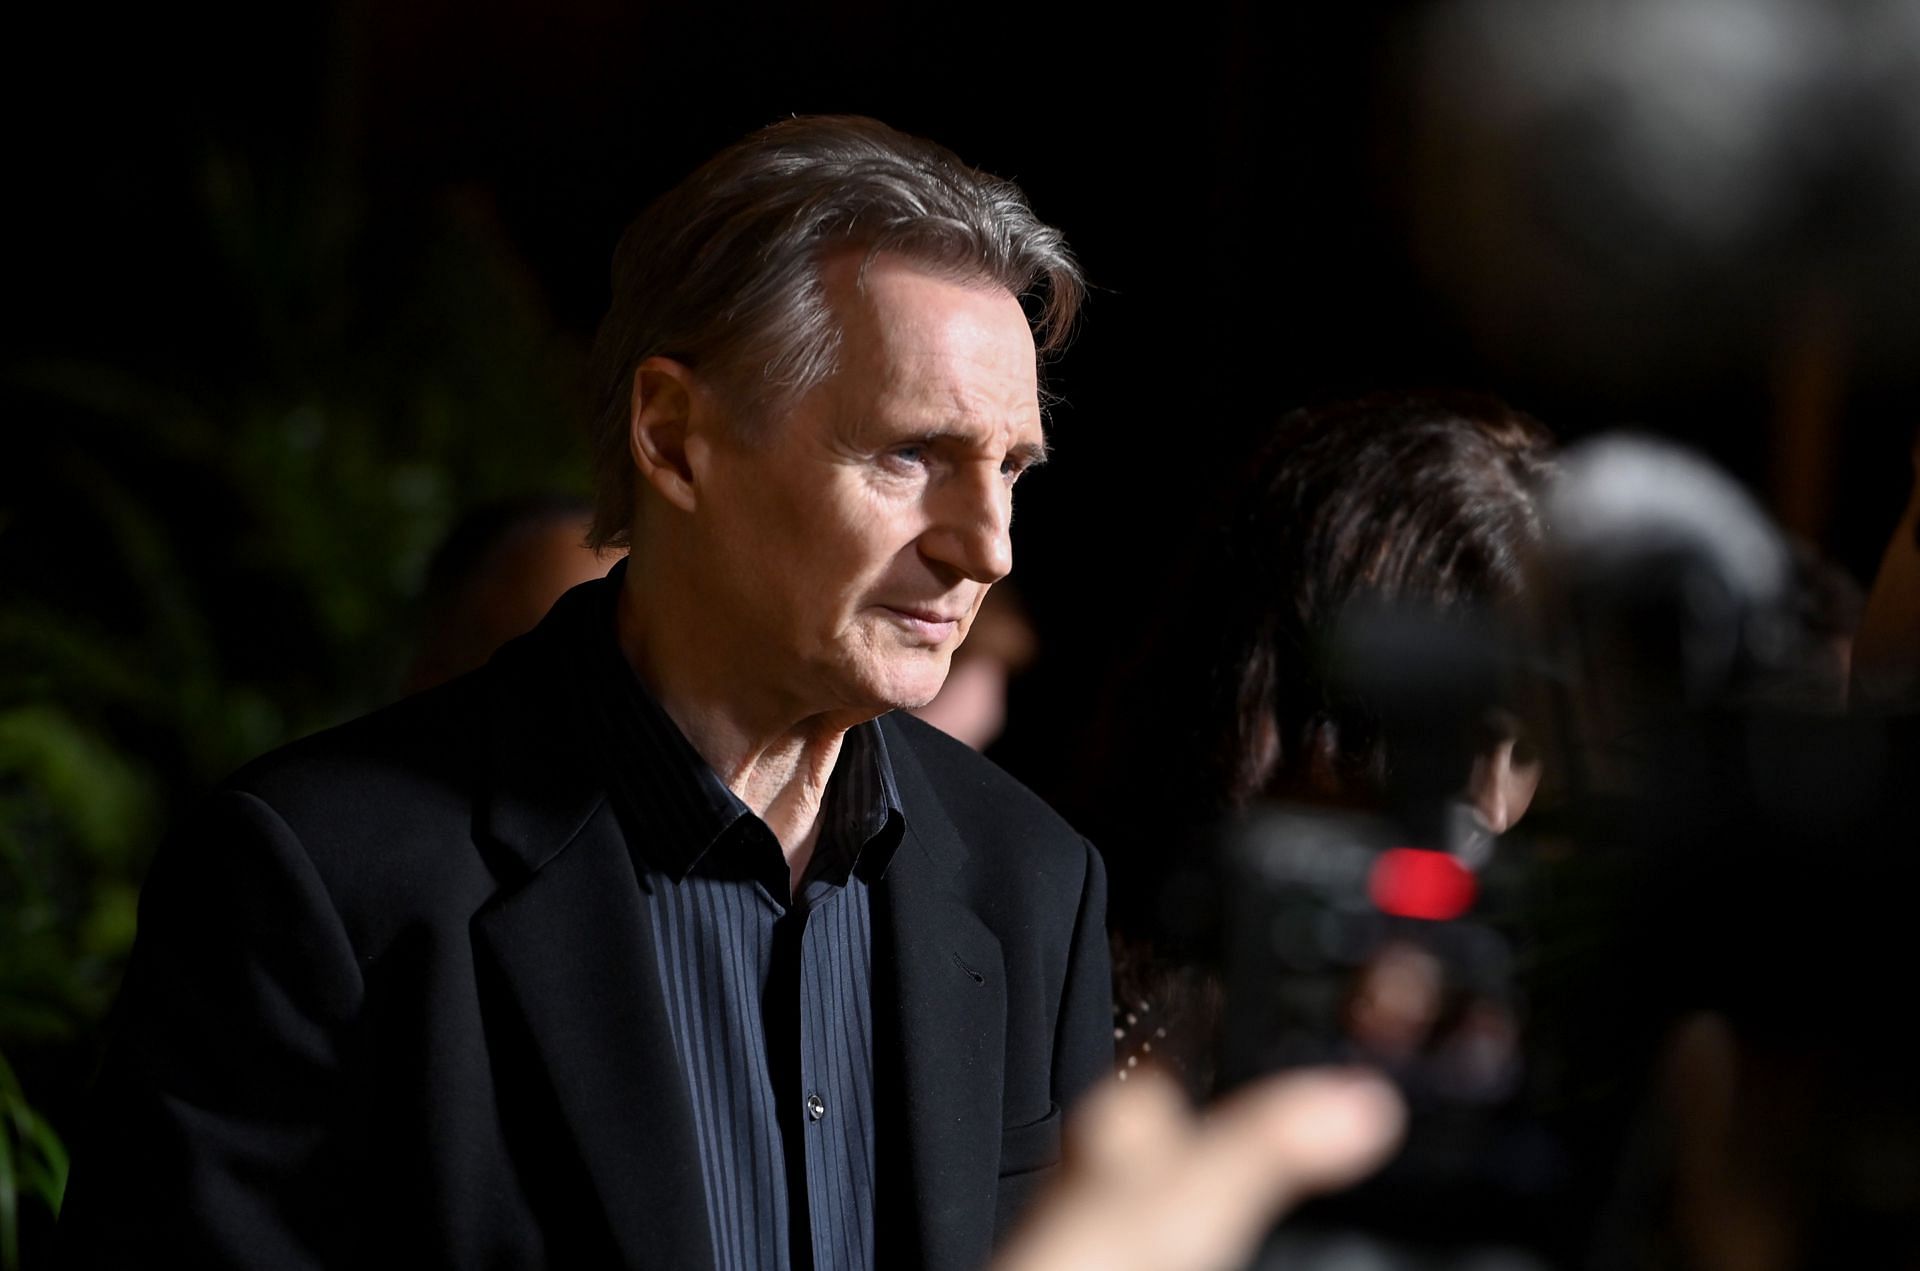 Liam Neeson stars in the movie (Image from Getty)